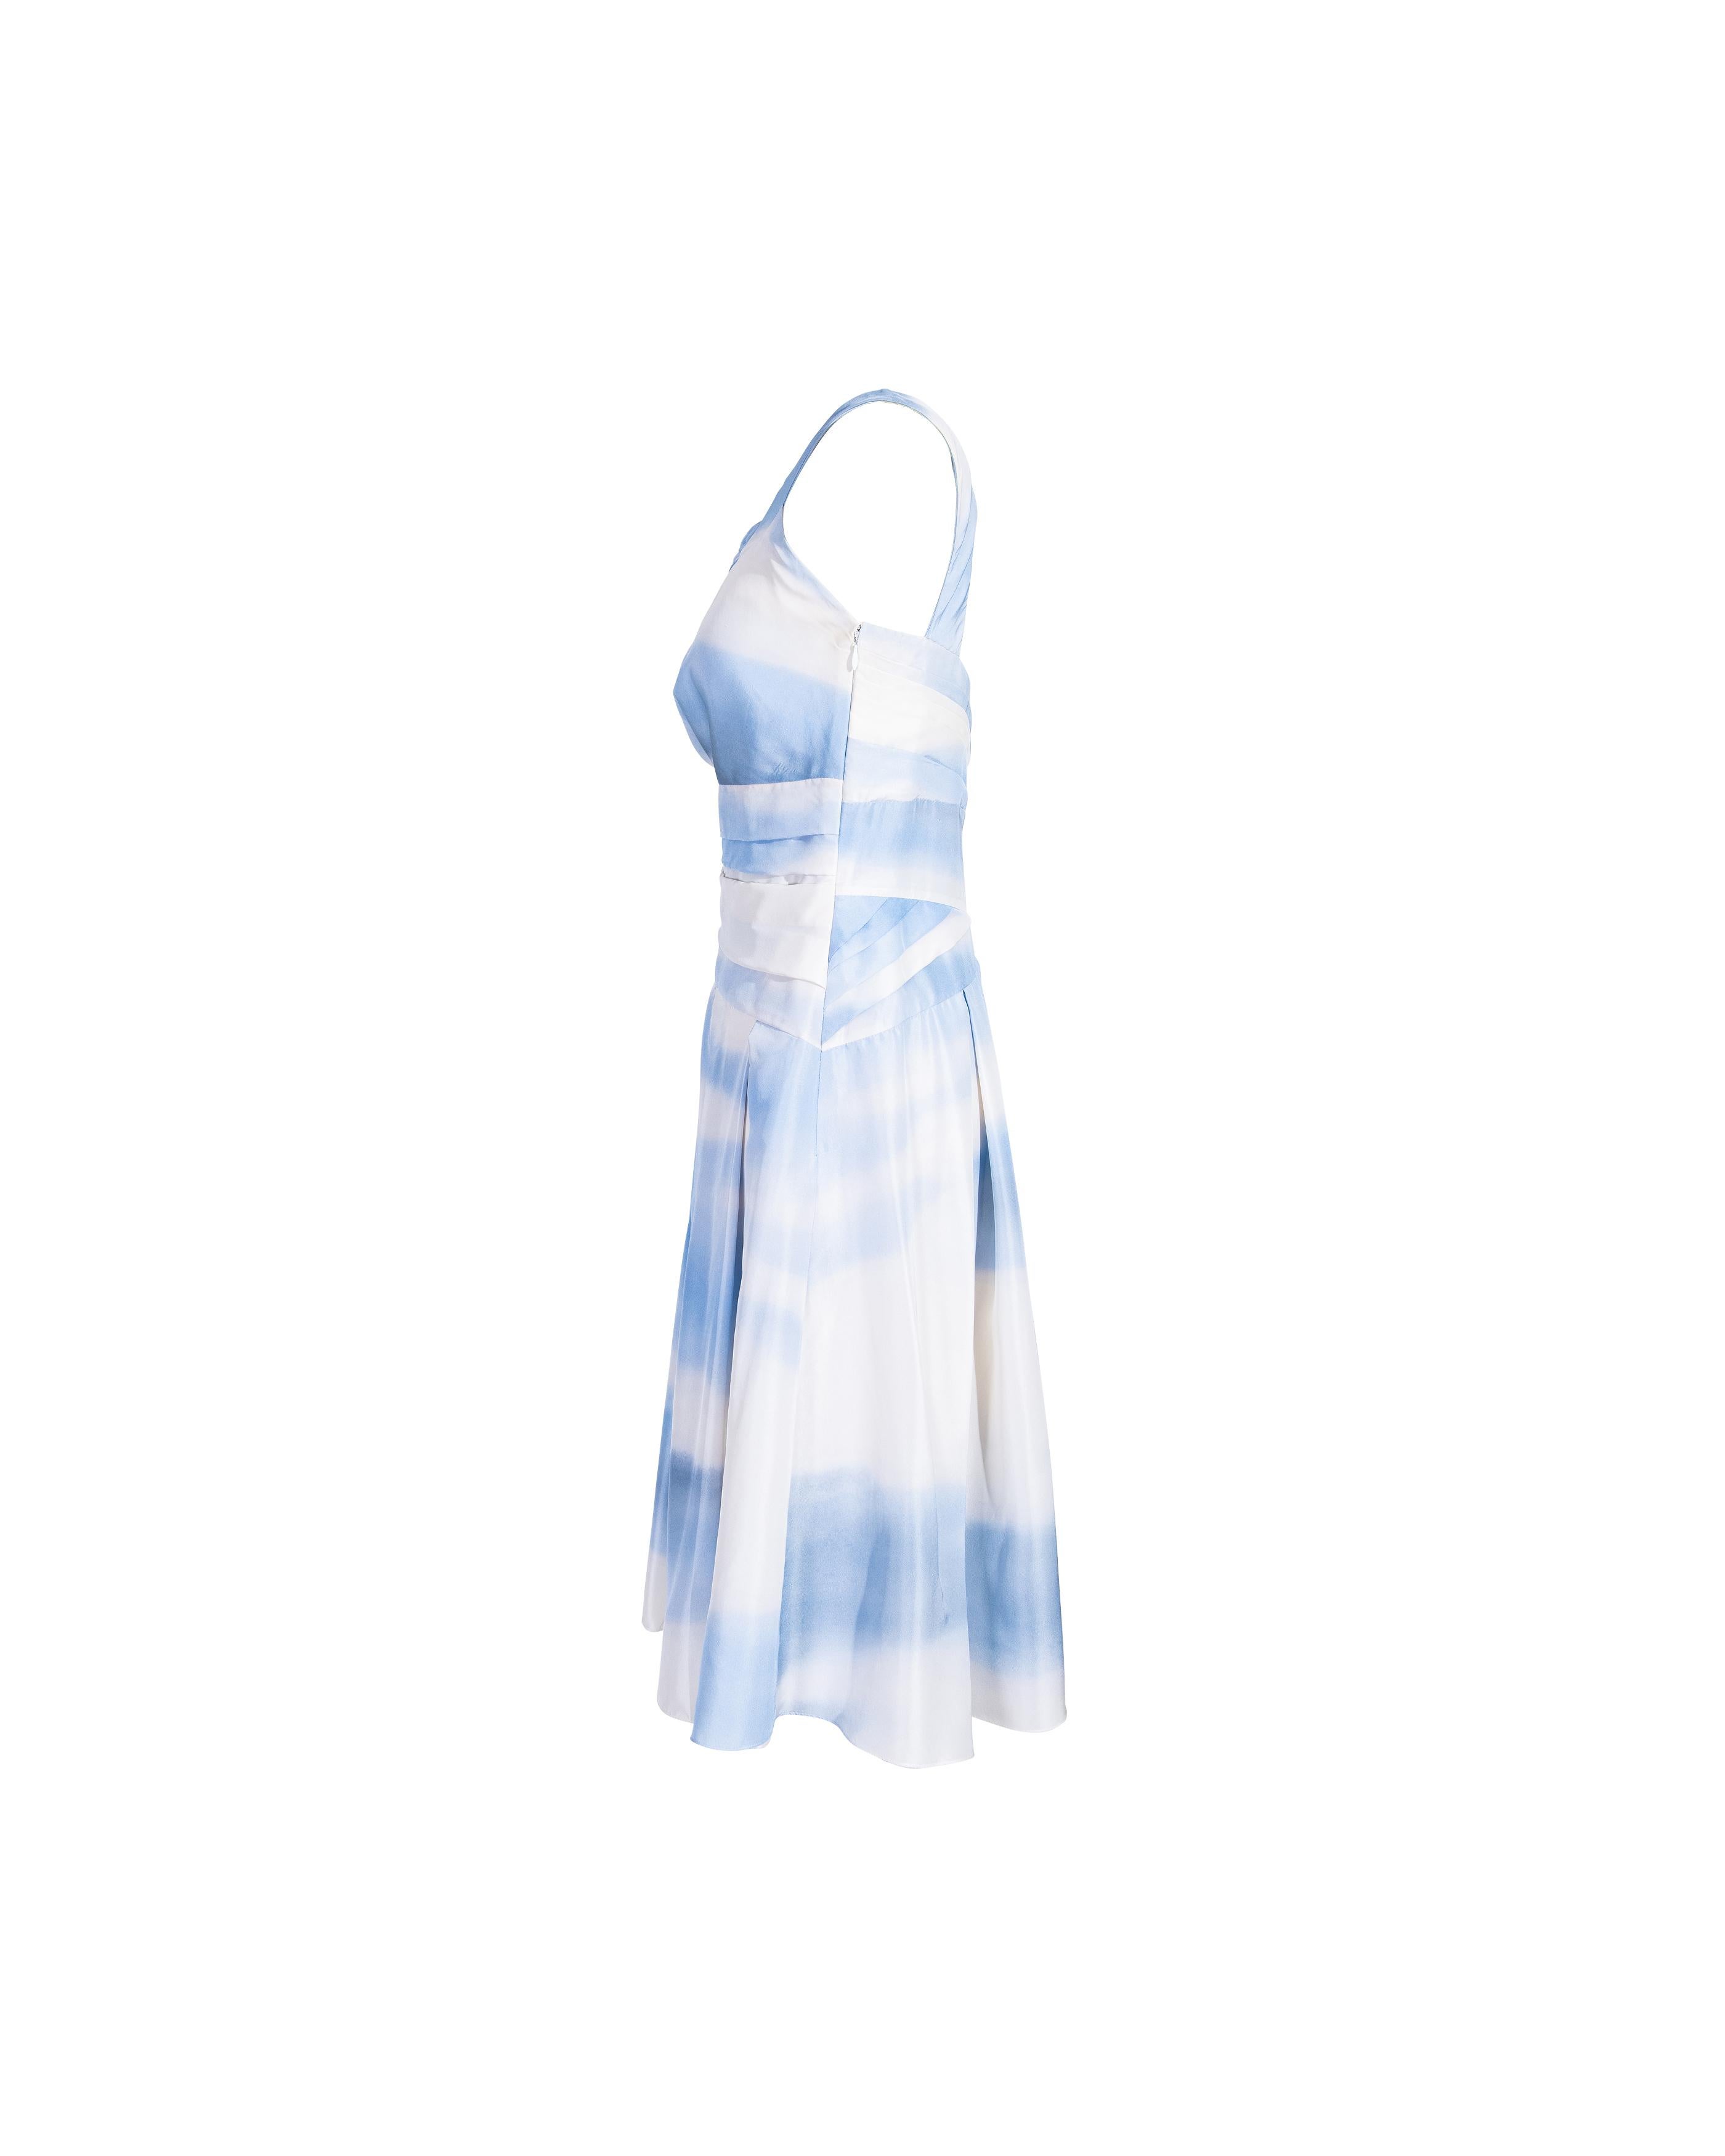 Women's or Men's c. 2007 Christian Dior by John Galliano Cloud Print Silk Dress and Stole